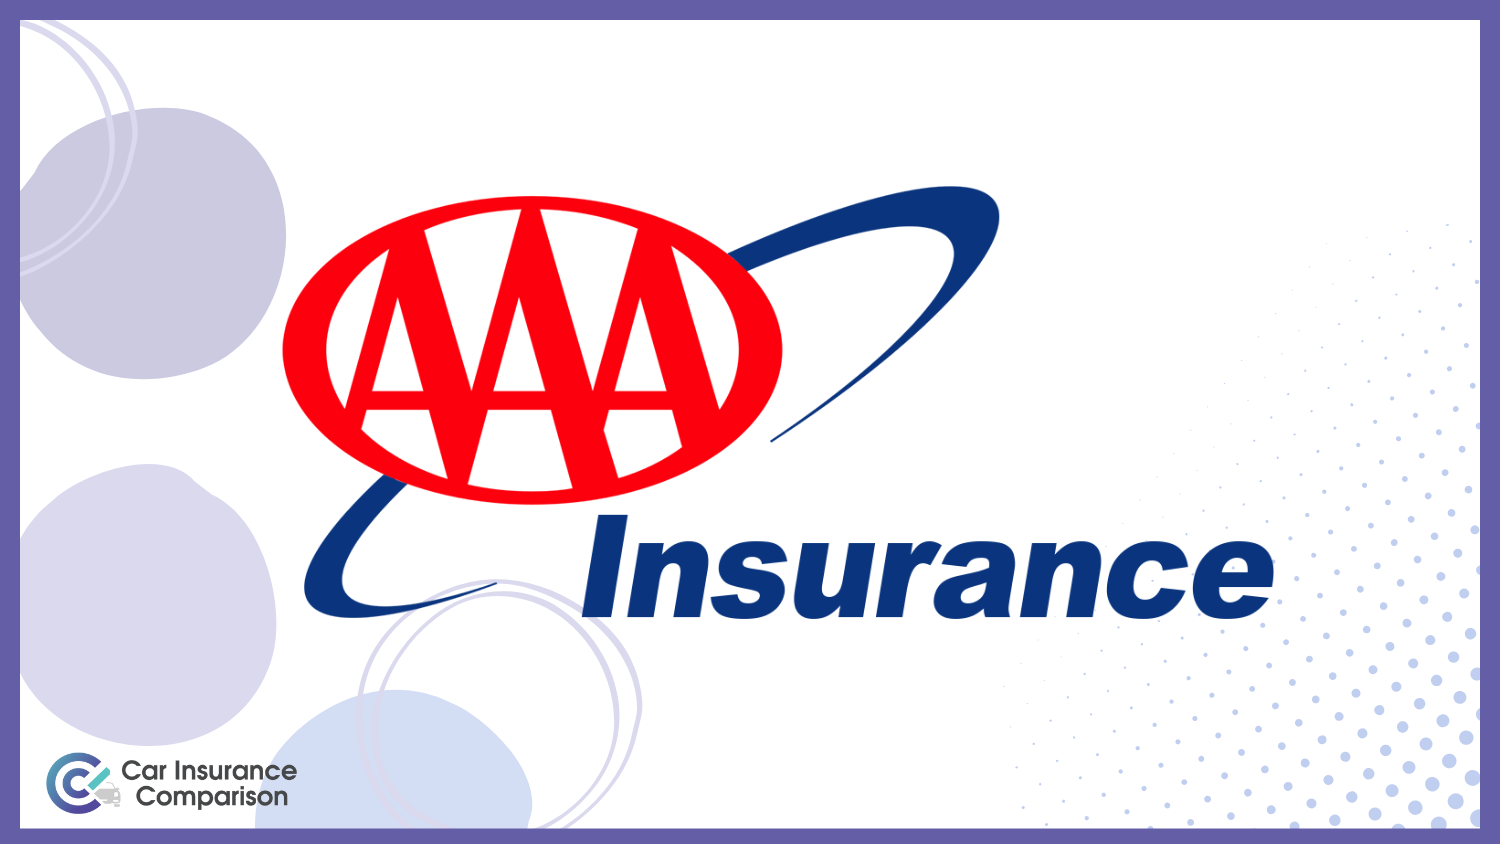 AAA: Cheap Car Insurance for Wheelchair-Accessible Vehicles